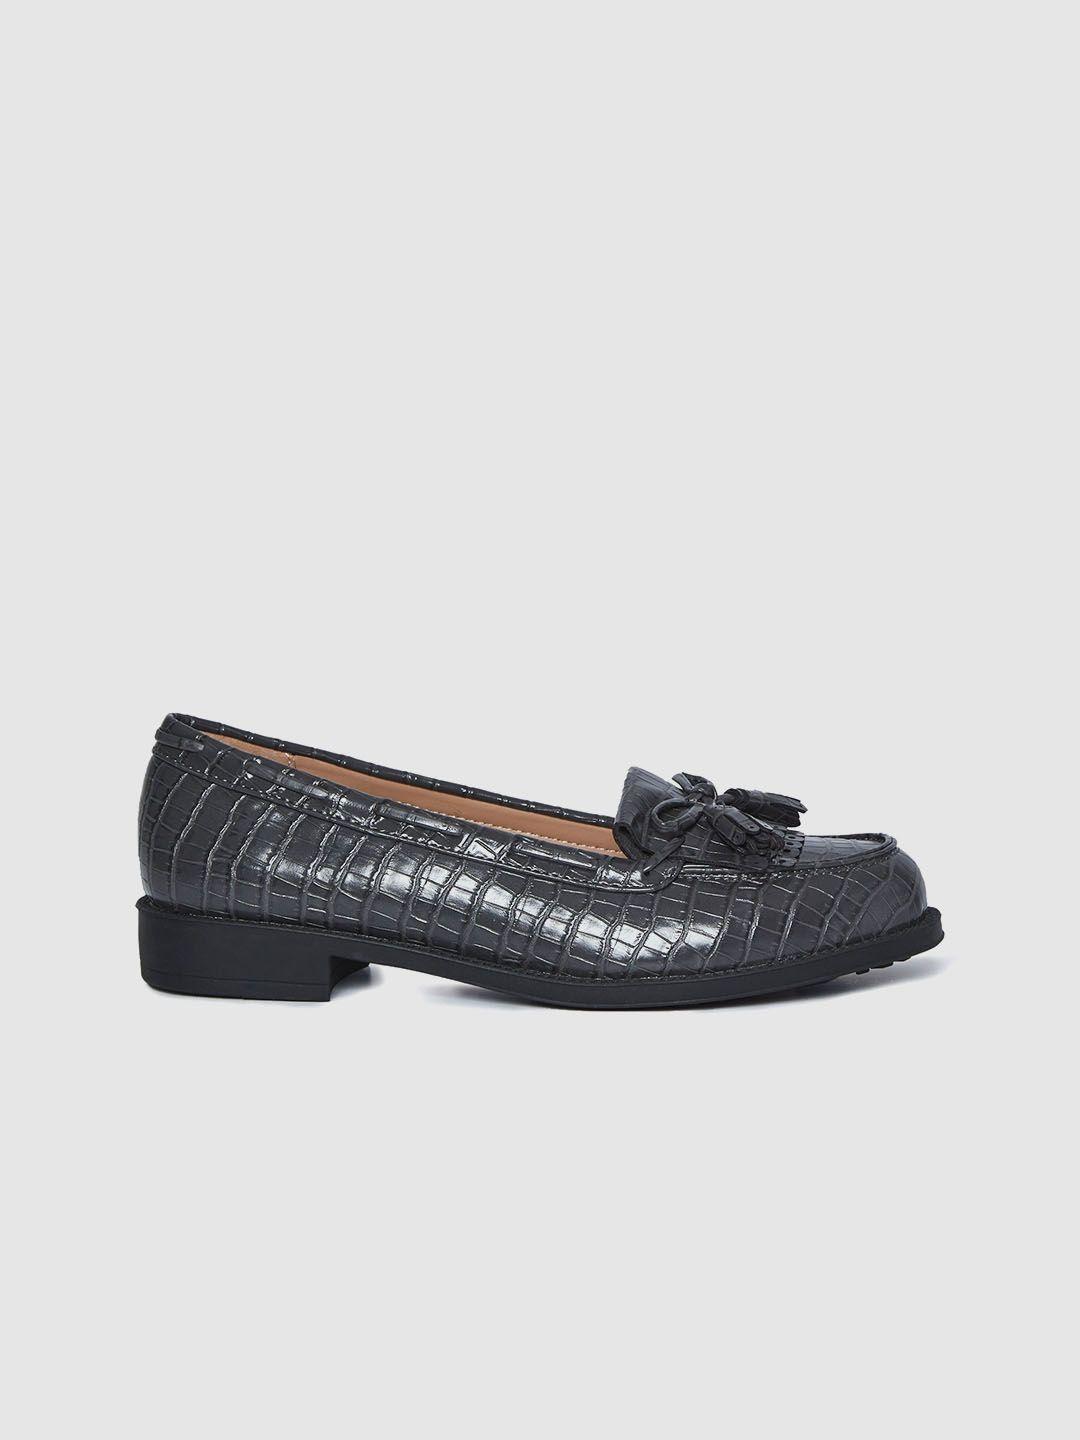 dorothy perkins women charcoal grey snakeskin textured boat shoes